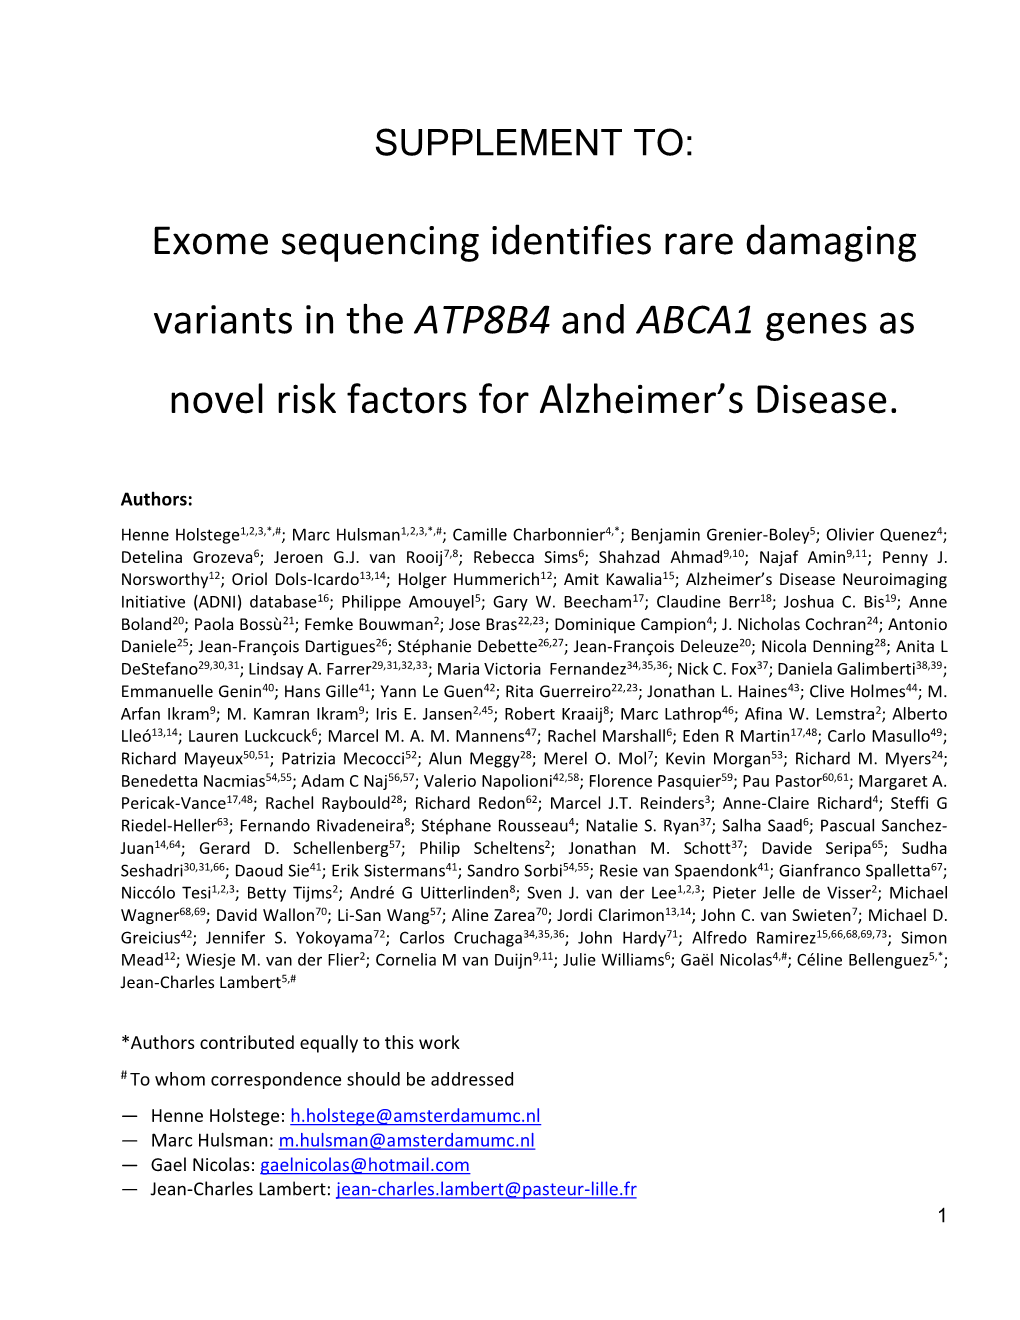 Exome Sequencing Identifies Rare Damaging Variants in the ATP8B4 and ABCA1 Genes As Novel Risk Factors for Alzheimer's Disease